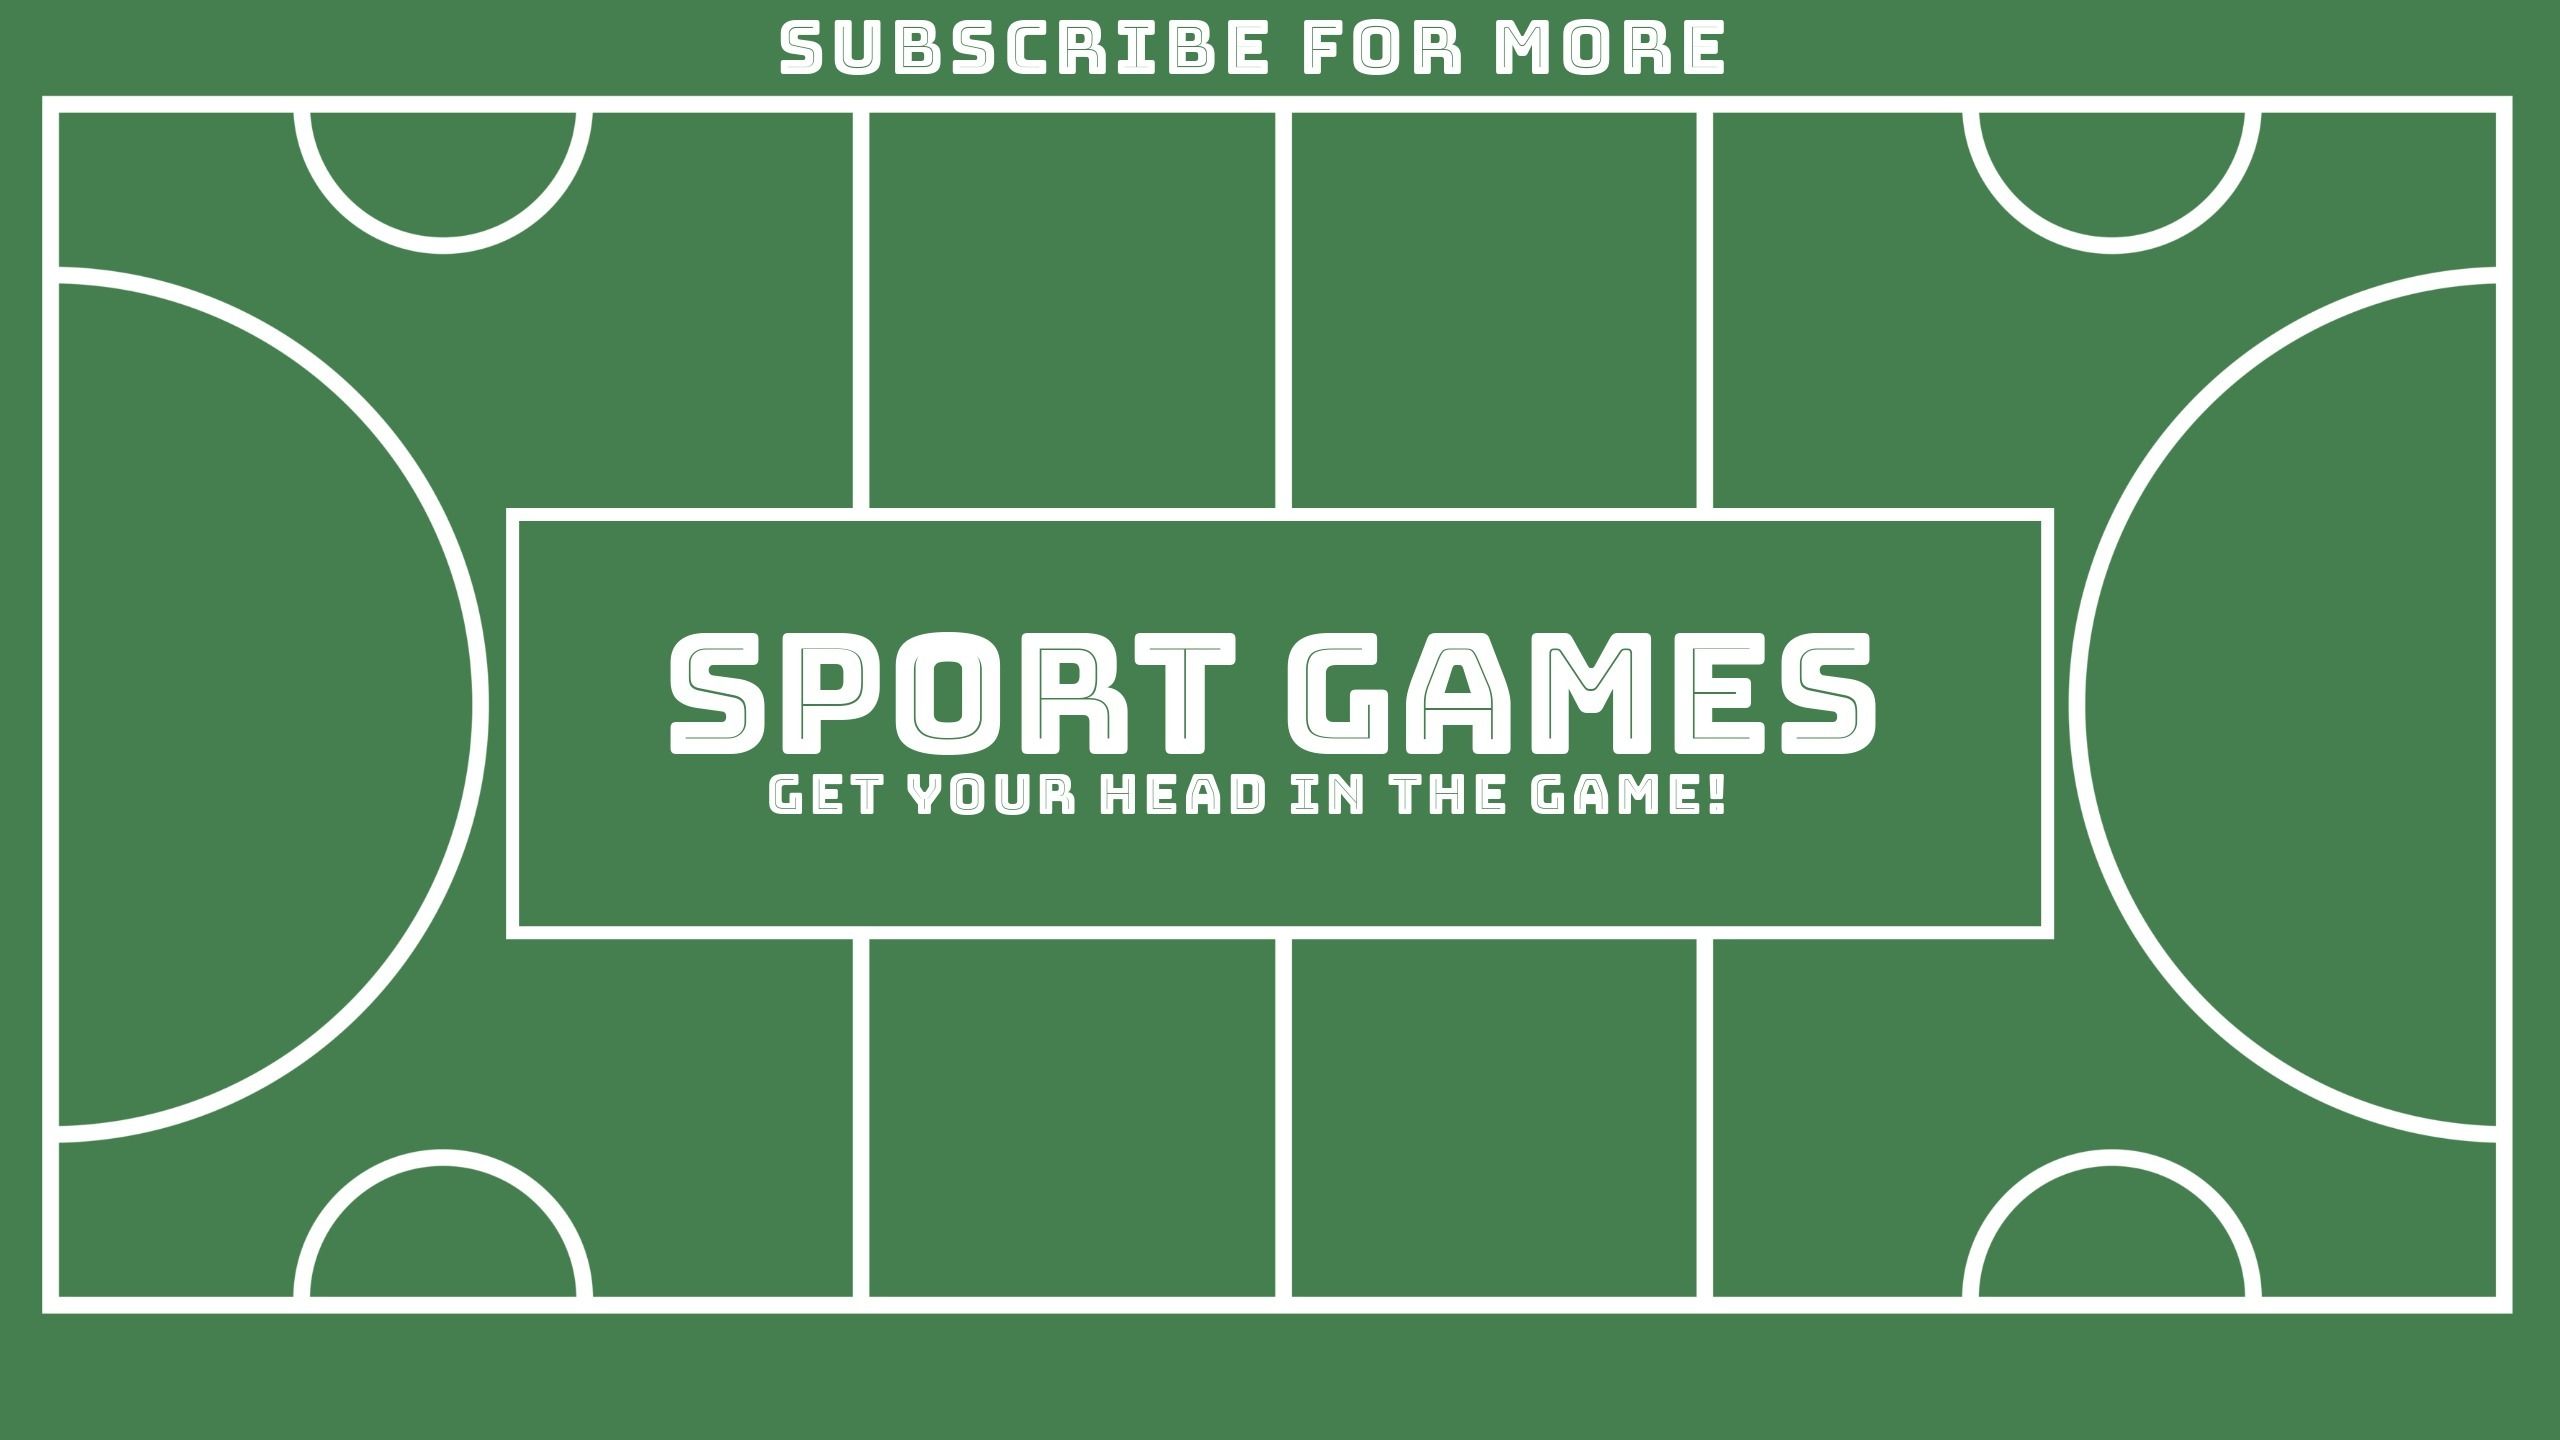 Sports field youtube banner template - 36 creative YouTube banner ideas and examples to boost your inspiration - Image